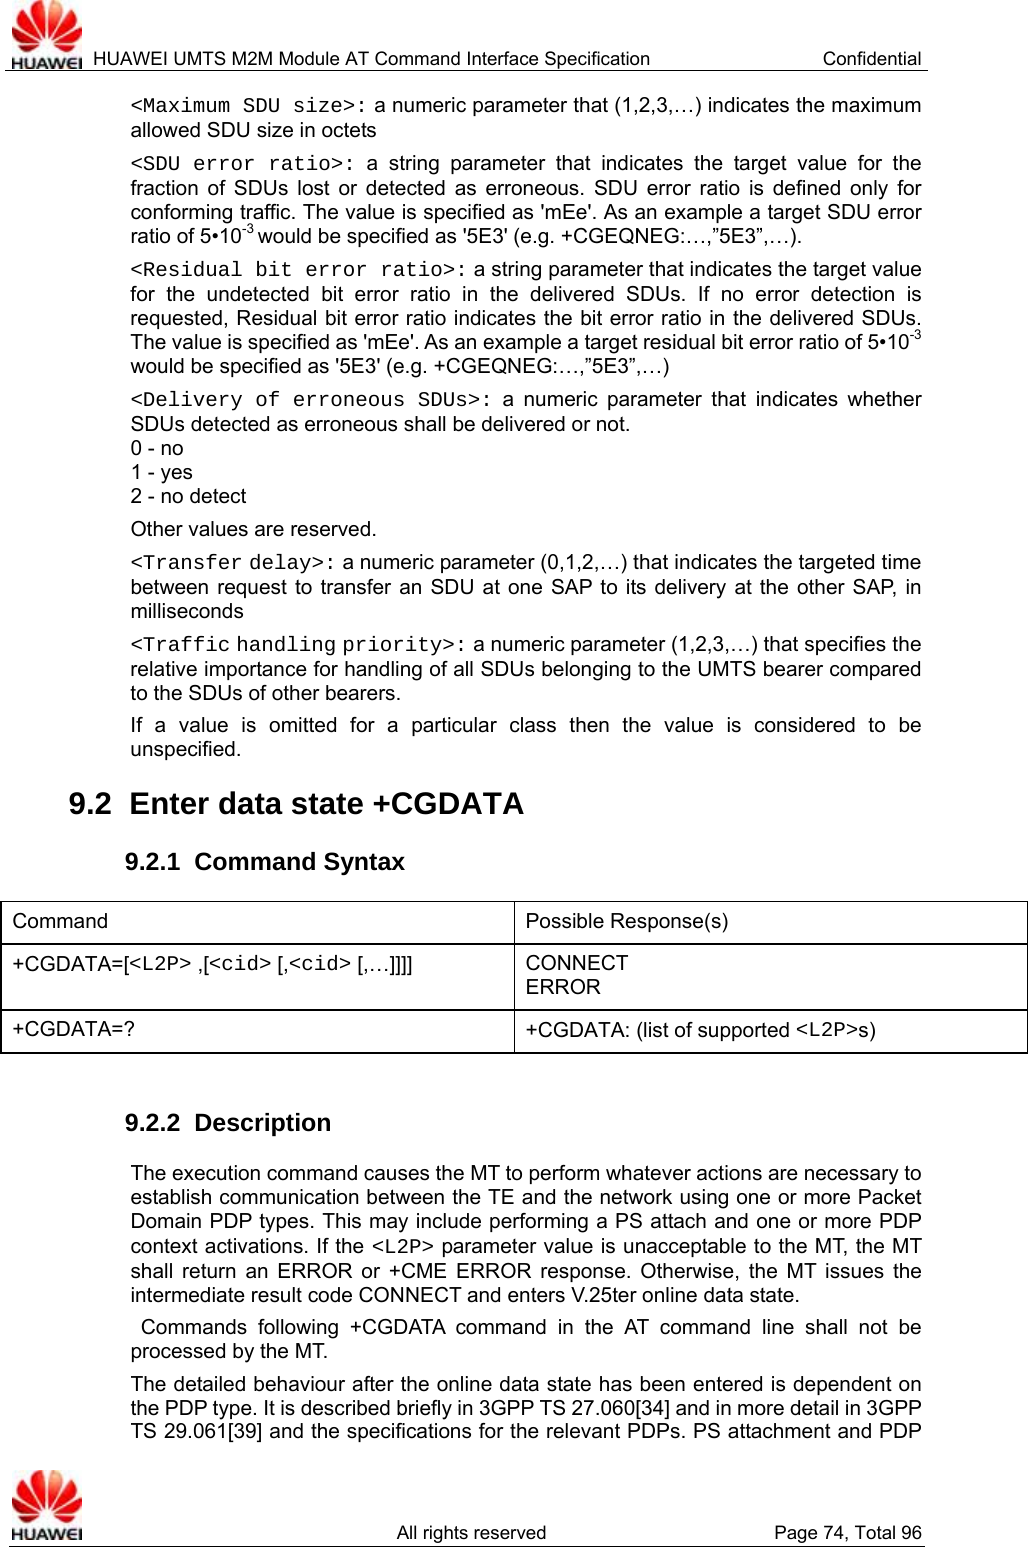  HUAWEI UMTS M2M Module AT Command Interface Specification  Confidential   All rights reserved  Page 74, Total 96 &lt;Maximum SDU size&gt;: a numeric parameter that (1,2,3,…) indicates the maximum allowed SDU size in octets   &lt;SDU error ratio&gt;: a string parameter that indicates the target value for the fraction of SDUs lost or detected as erroneous. SDU error ratio is defined only for conforming traffic. The value is specified as &apos;mEe&apos;. As an example a target SDU error ratio of 5•10-3 would be specified as &apos;5E3&apos; (e.g. +CGEQNEG:…,”5E3”,…). &lt;Residual bit error ratio&gt;: a string parameter that indicates the target value for the undetected bit error ratio in the delivered SDUs. If no error detection is requested, Residual bit error ratio indicates the bit error ratio in the delivered SDUs. The value is specified as &apos;mEe&apos;. As an example a target residual bit error ratio of 5•10-3 would be specified as &apos;5E3&apos; (e.g. +CGEQNEG:…,”5E3”,…)   &lt;Delivery of erroneous SDUs&gt;: a numeric parameter that indicates whether SDUs detected as erroneous shall be delivered or not. 0 - no 1 - yes 2 - no detect Other values are reserved. &lt;Transfer delay&gt;: a numeric parameter (0,1,2,…) that indicates the targeted time between request to transfer an SDU at one SAP to its delivery at the other SAP, in milliseconds &lt;Traffic handling priority&gt;: a numeric parameter (1,2,3,…) that specifies the relative importance for handling of all SDUs belonging to the UMTS bearer compared to the SDUs of other bearers. If a value is omitted for a particular class then the value is considered to be unspecified. 9.2  Enter data state +CGDATA 9.2.1  Command Syntax Command Possible Response(s) +CGDATA=[&lt;L2P&gt; ,[&lt;cid&gt; [,&lt;cid&gt; [,…]]]]  CONNECT ERROR +CGDATA=?  +CGDATA: (list of supported &lt;L2P&gt;s)  9.2.2  Description The execution command causes the MT to perform whatever actions are necessary to establish communication between the TE and the network using one or more Packet Domain PDP types. This may include performing a PS attach and one or more PDP context activations. If the &lt;L2P&gt; parameter value is unacceptable to the MT, the MT shall return an ERROR or +CME ERROR response. Otherwise, the MT issues the intermediate result code CONNECT and enters V.25ter online data state.  Commands following +CGDATA command in the AT command line shall not be processed by the MT. The detailed behaviour after the online data state has been entered is dependent on the PDP type. It is described briefly in 3GPP TS 27.060[34] and in more detail in 3GPP TS 29.061[39] and the specifications for the relevant PDPs. PS attachment and PDP 